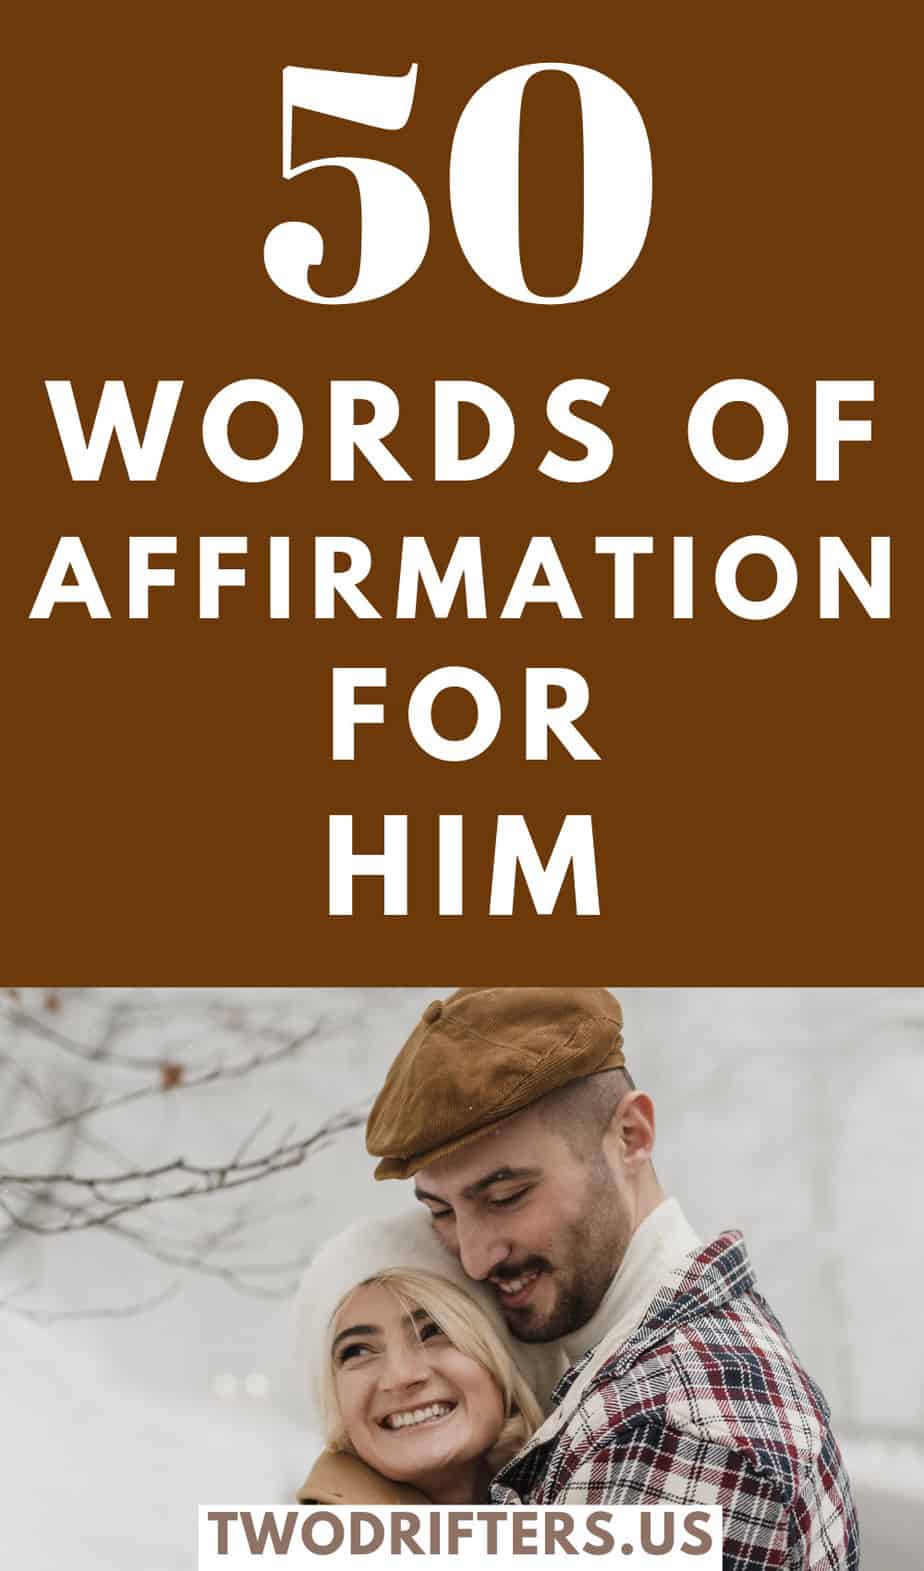 Pinterest social image that says "50 Words of Affirmation for Him."